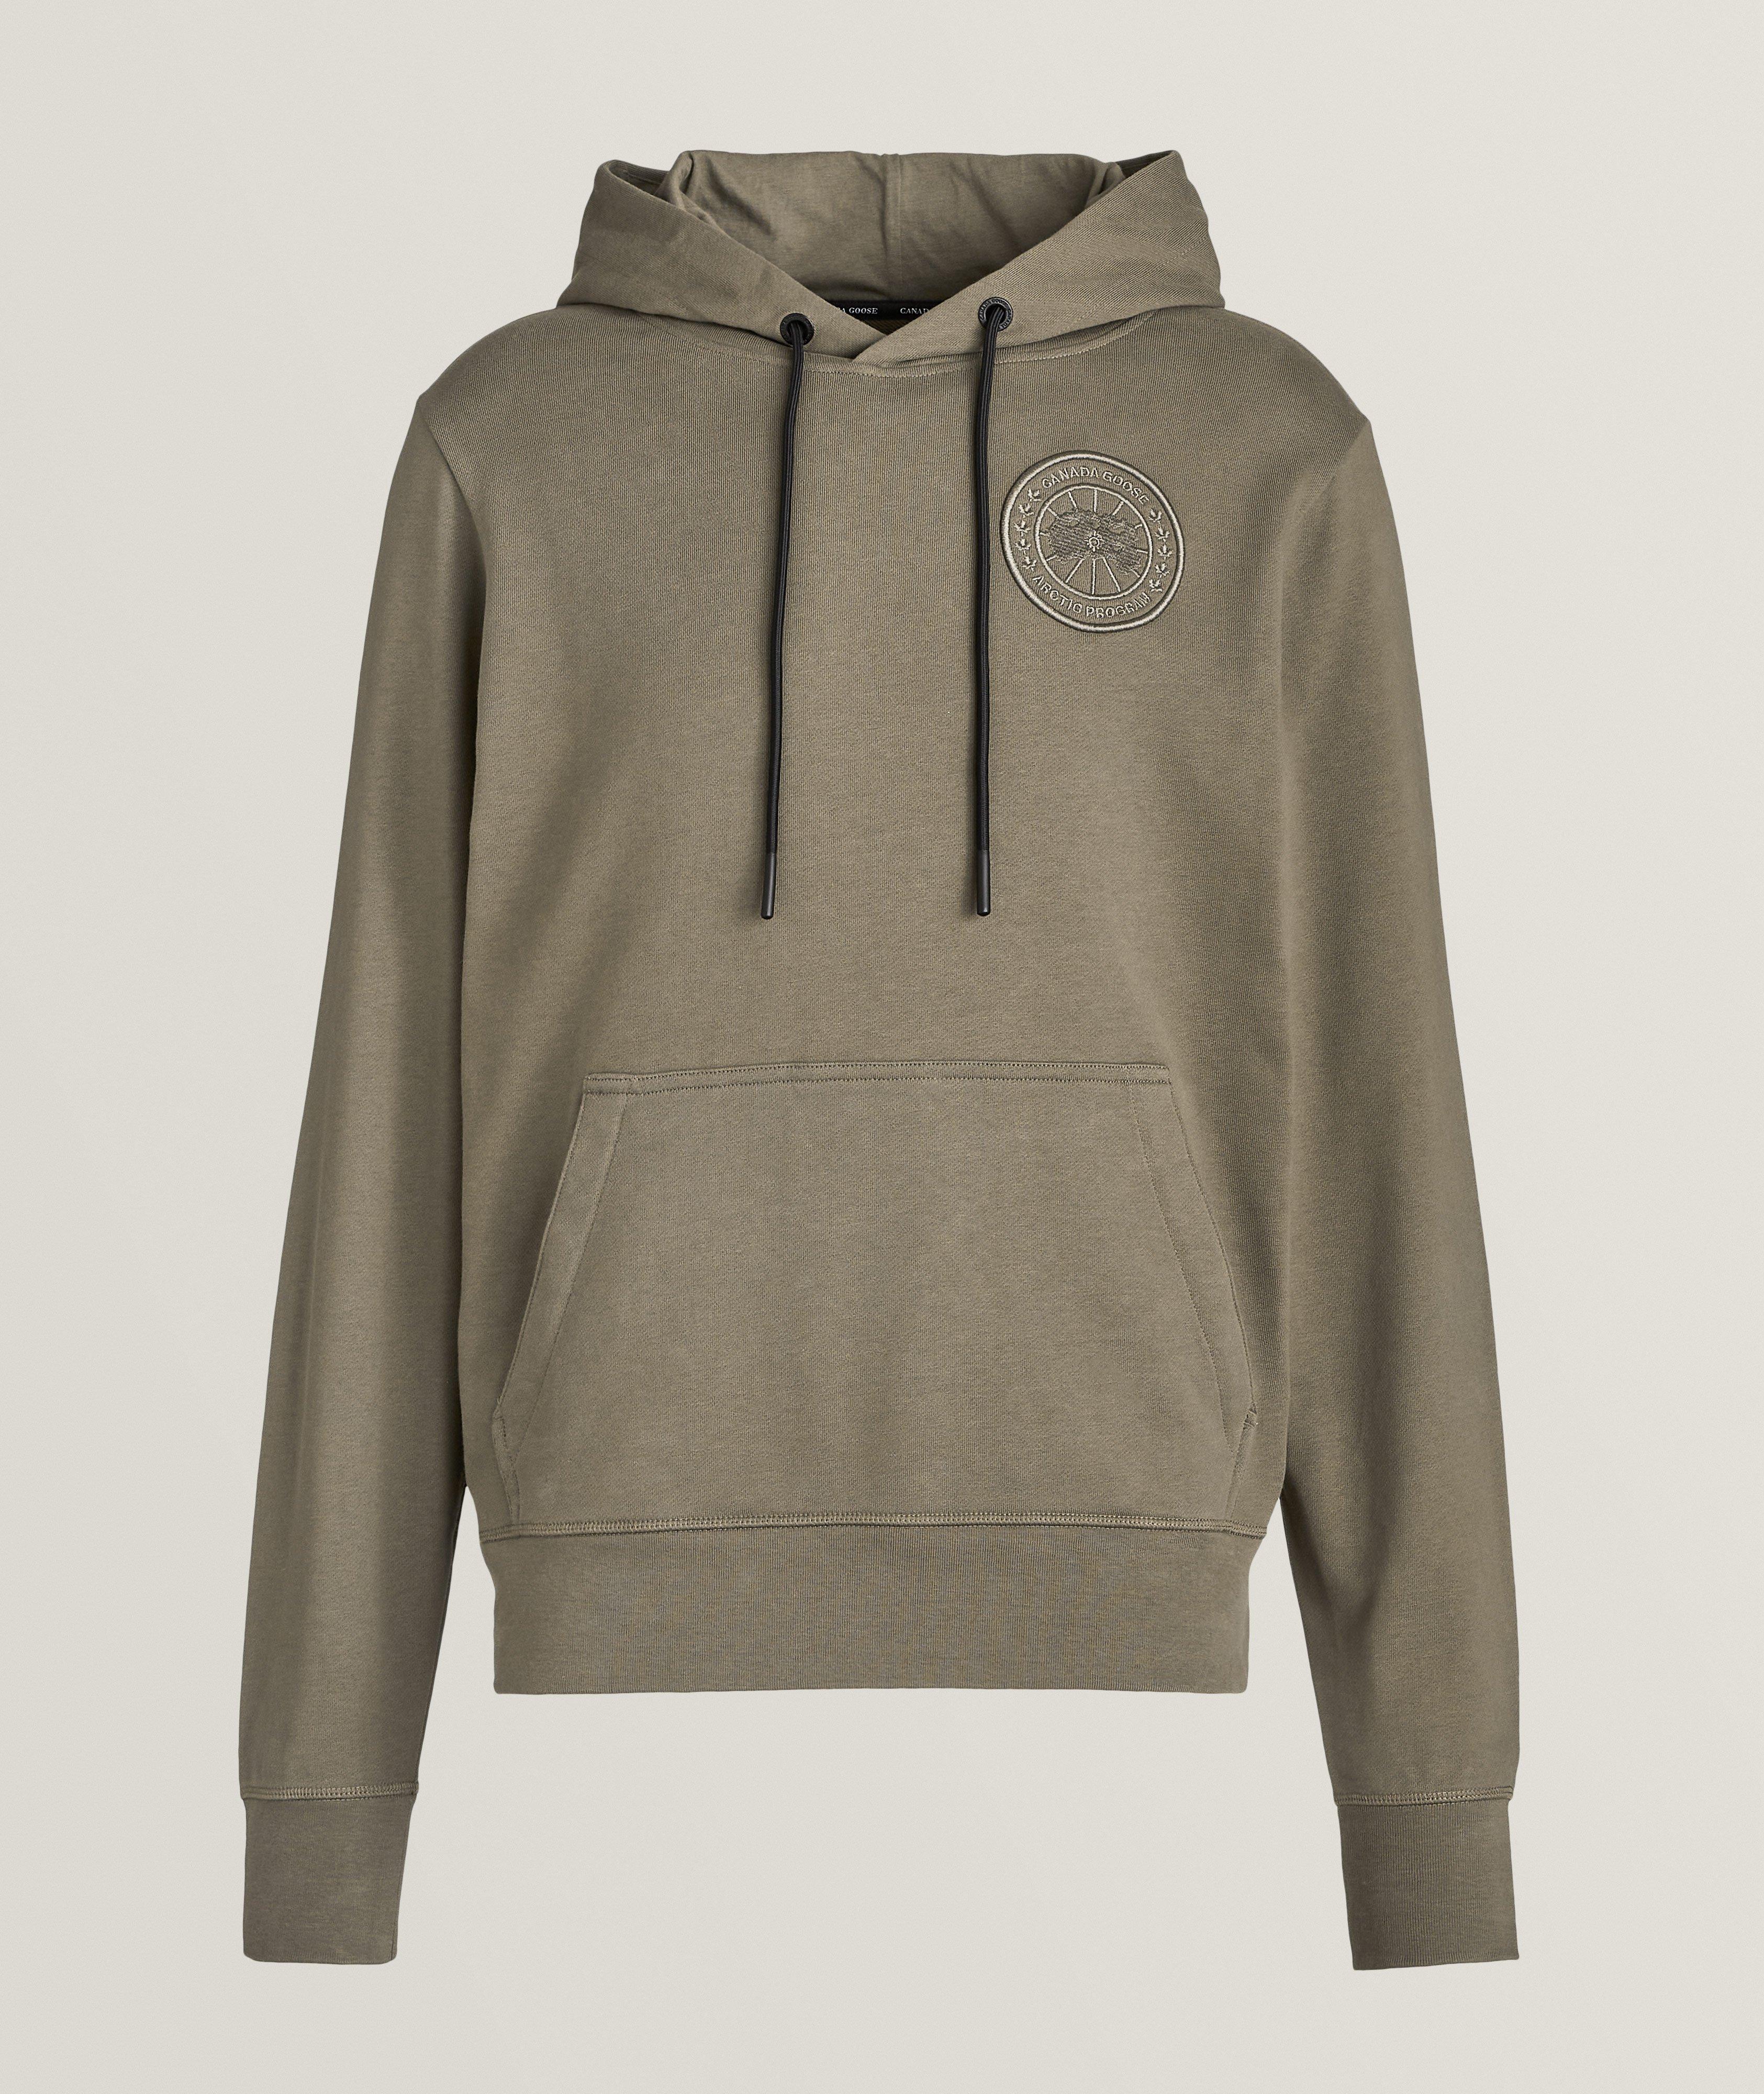 Huron Embroidered Logo Hooded Sweater image 0